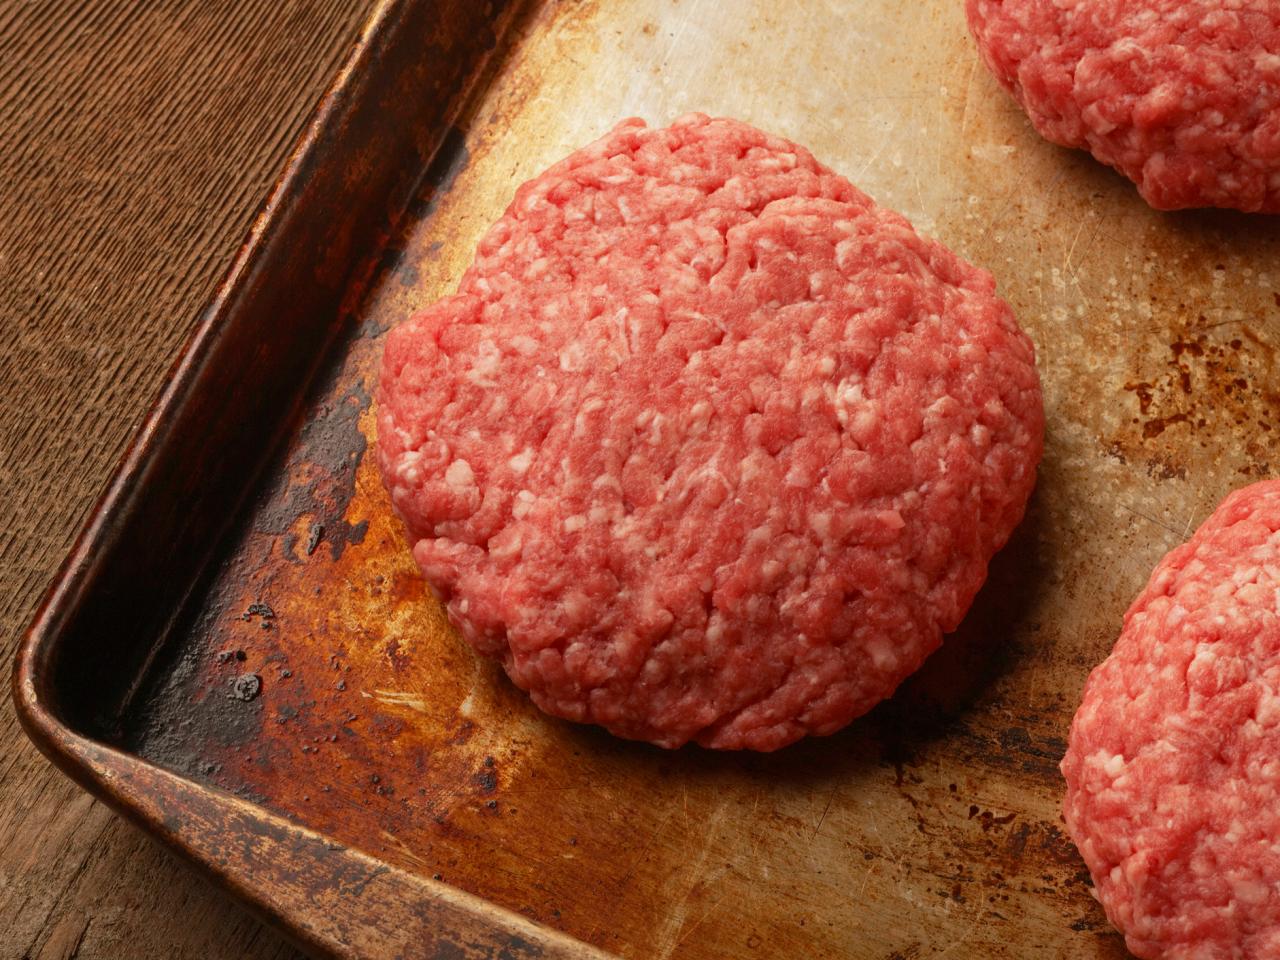 How Long Can You Safely Store Ground Beef in the Freezer?